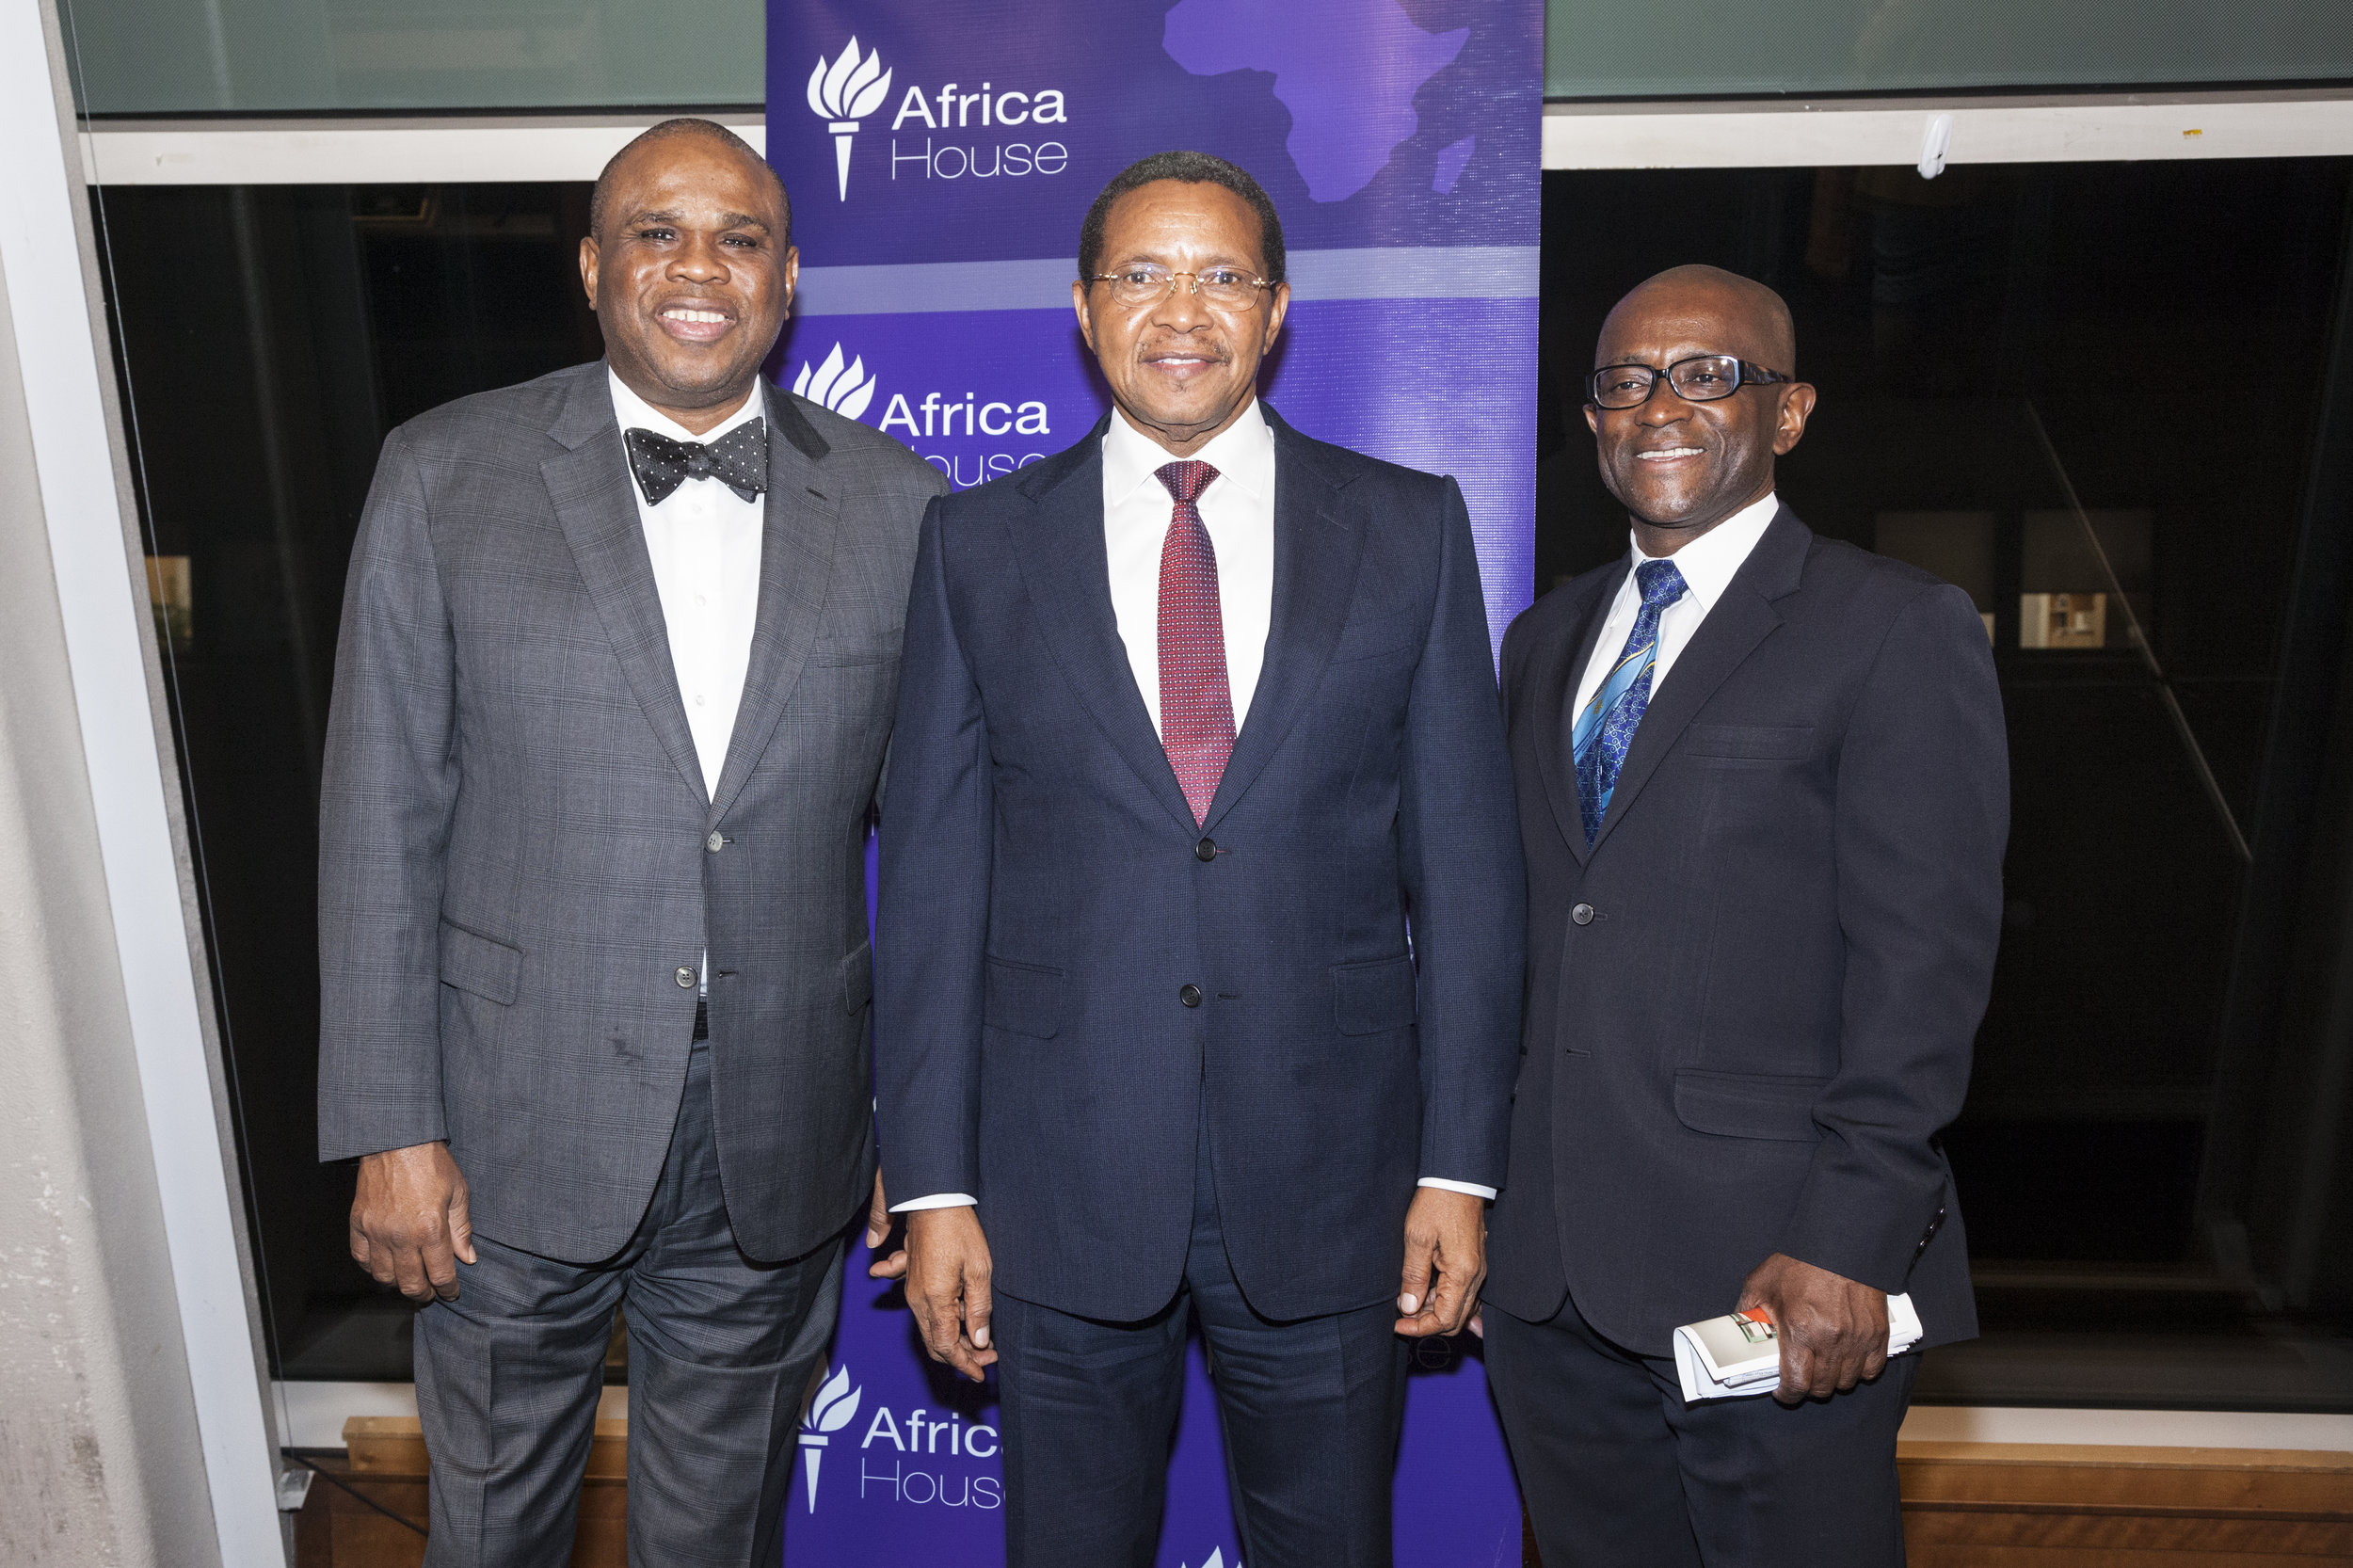 2018 Gala Honorees H.E. Dr. Jakaya M. Kikwete, Former President of the United Republic of Tanzania, and Dr. Benedict Oramah, President of the African Export–Import Bank (Afreximbank)